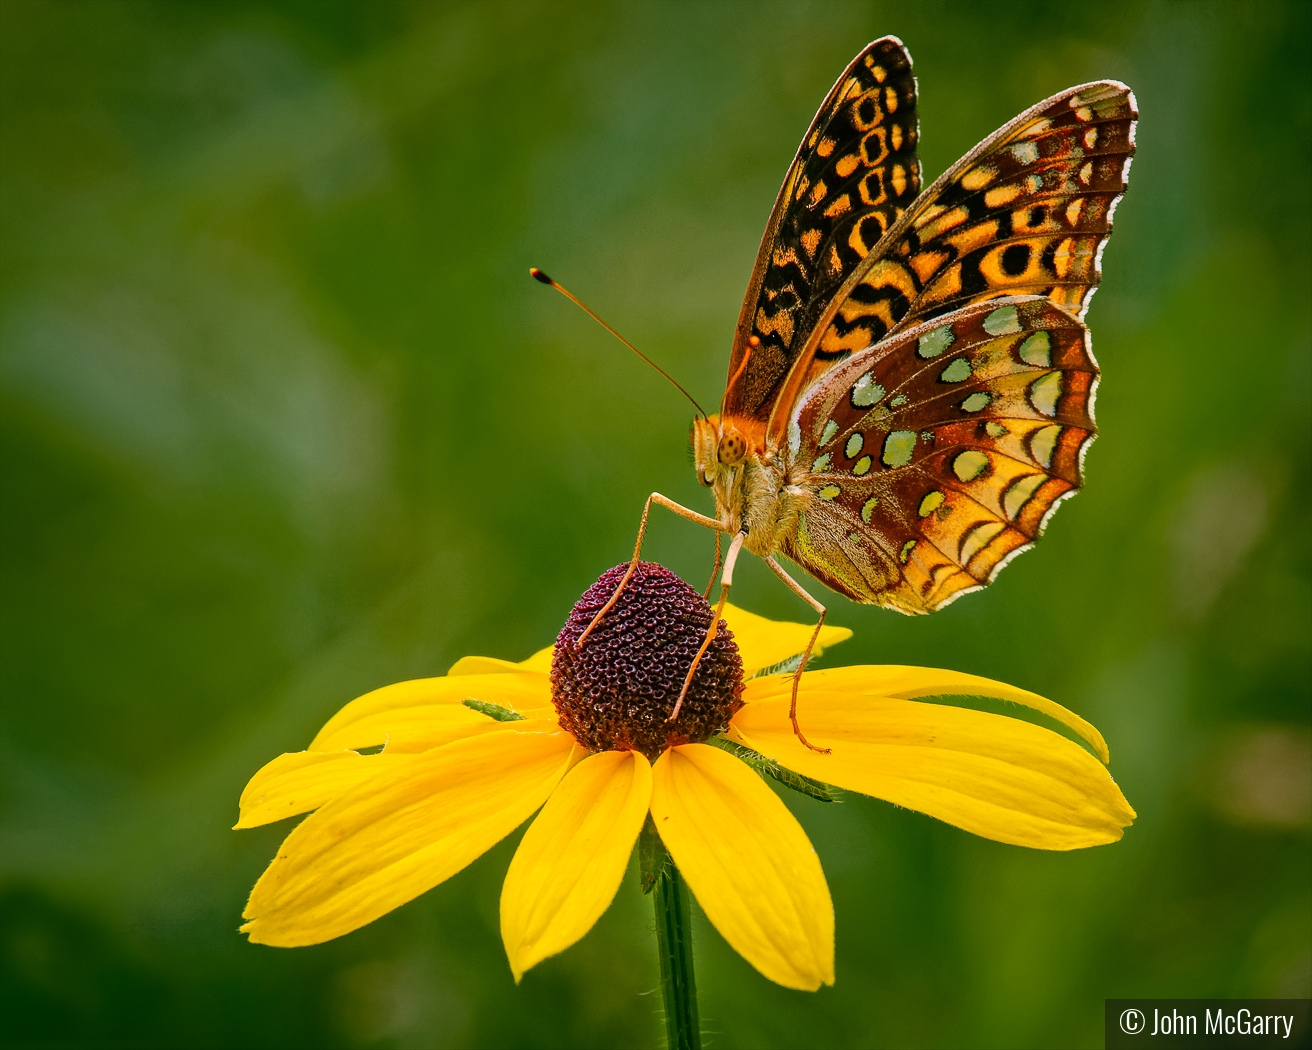 Great Spangled Fritillary on Cone Flower by John McGarry